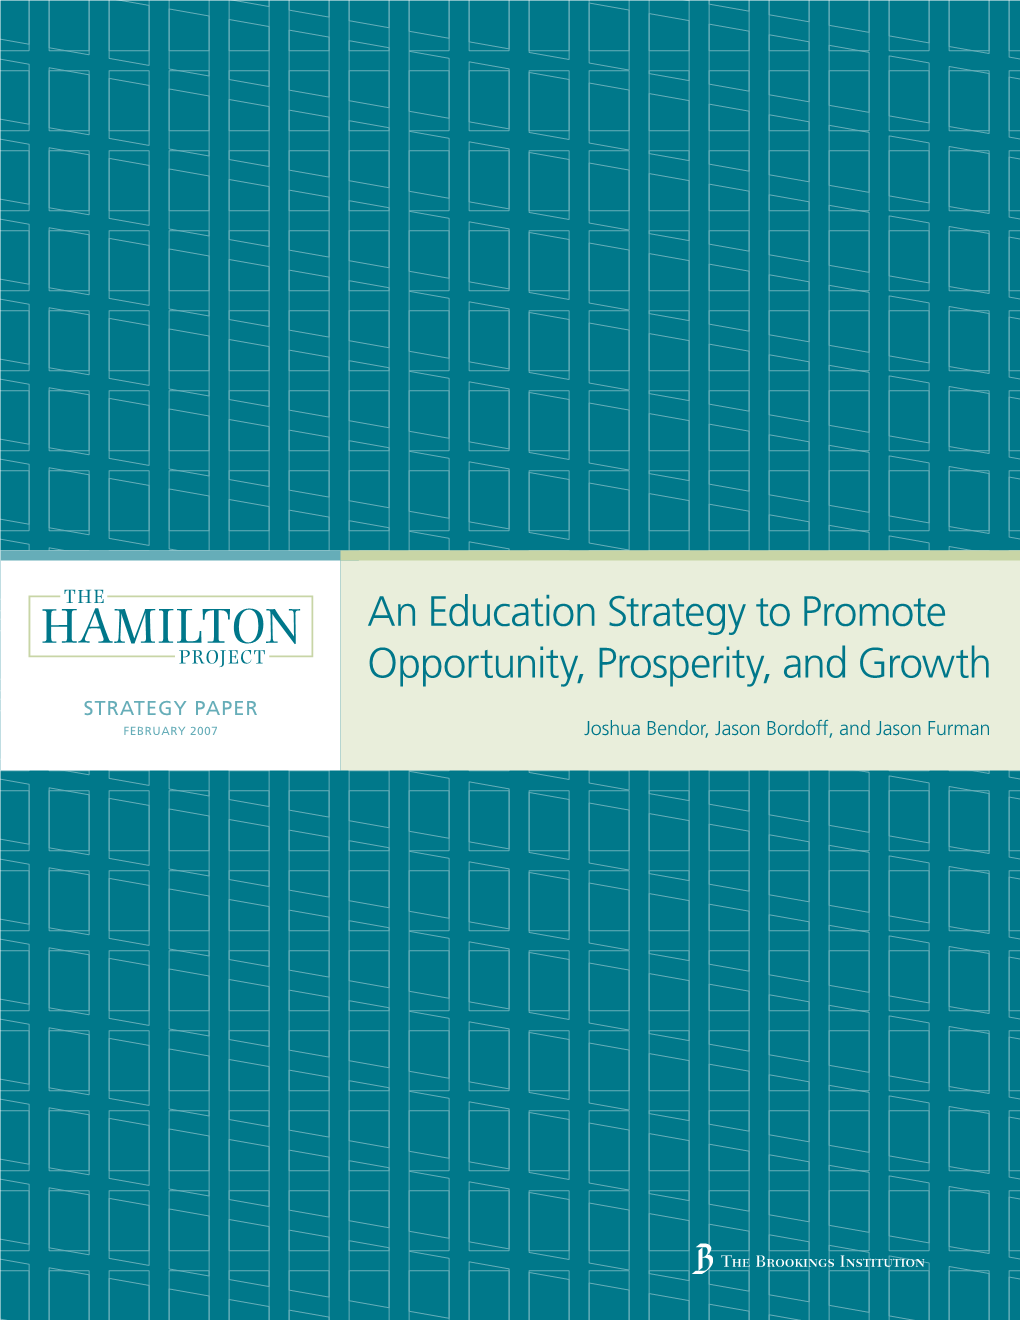 Hamilton Project Seeks to Advance America’S Promise of Opportunity, Prosperity, and Growth